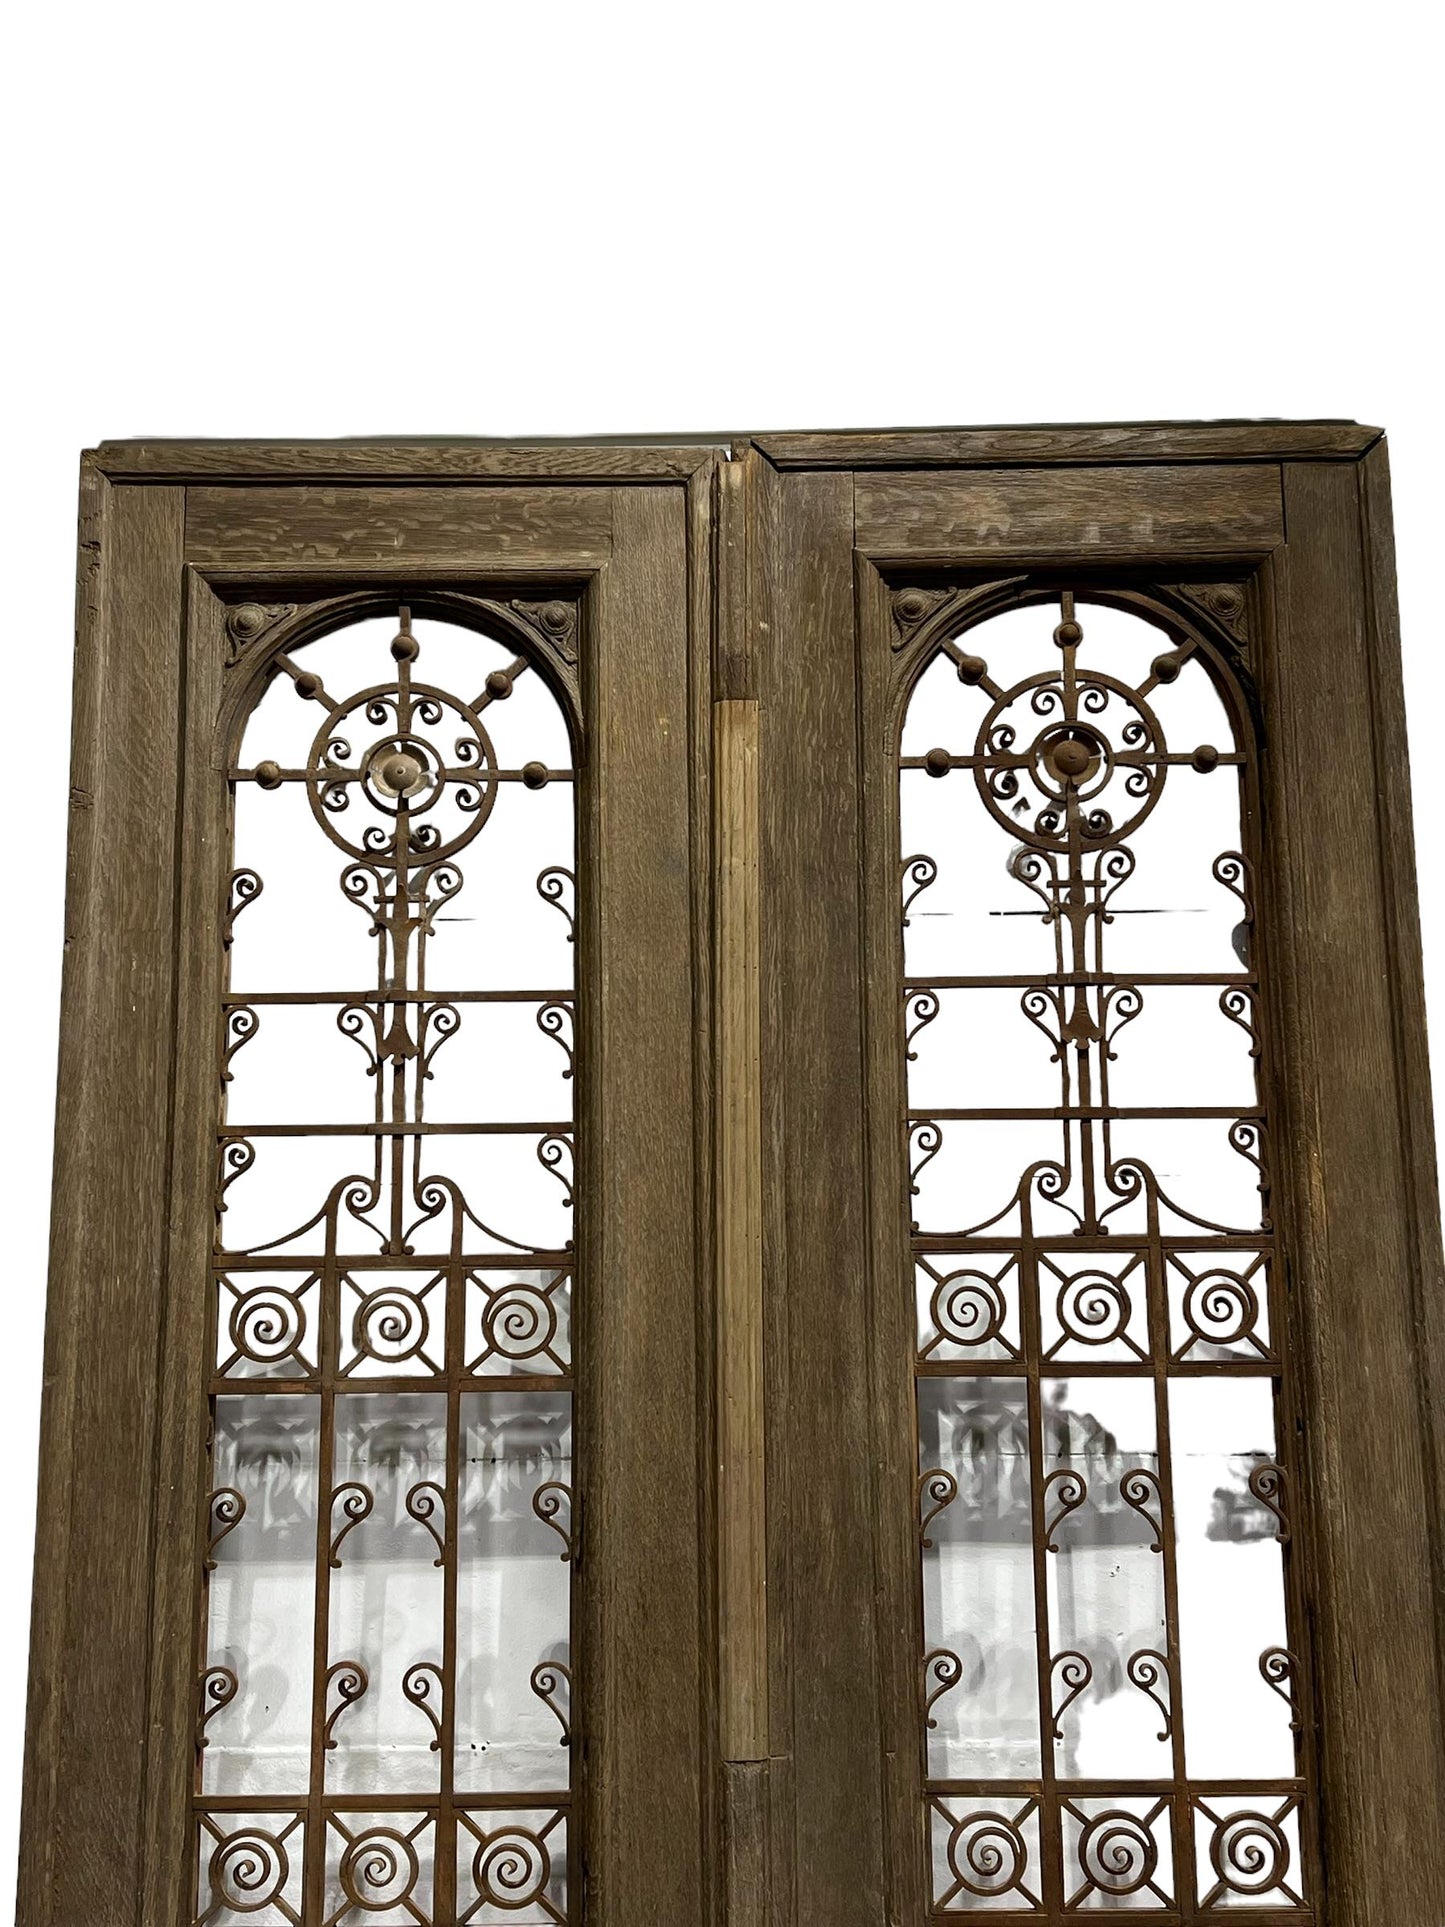 Pair of Antique French Doors with Iron Work (no glass)